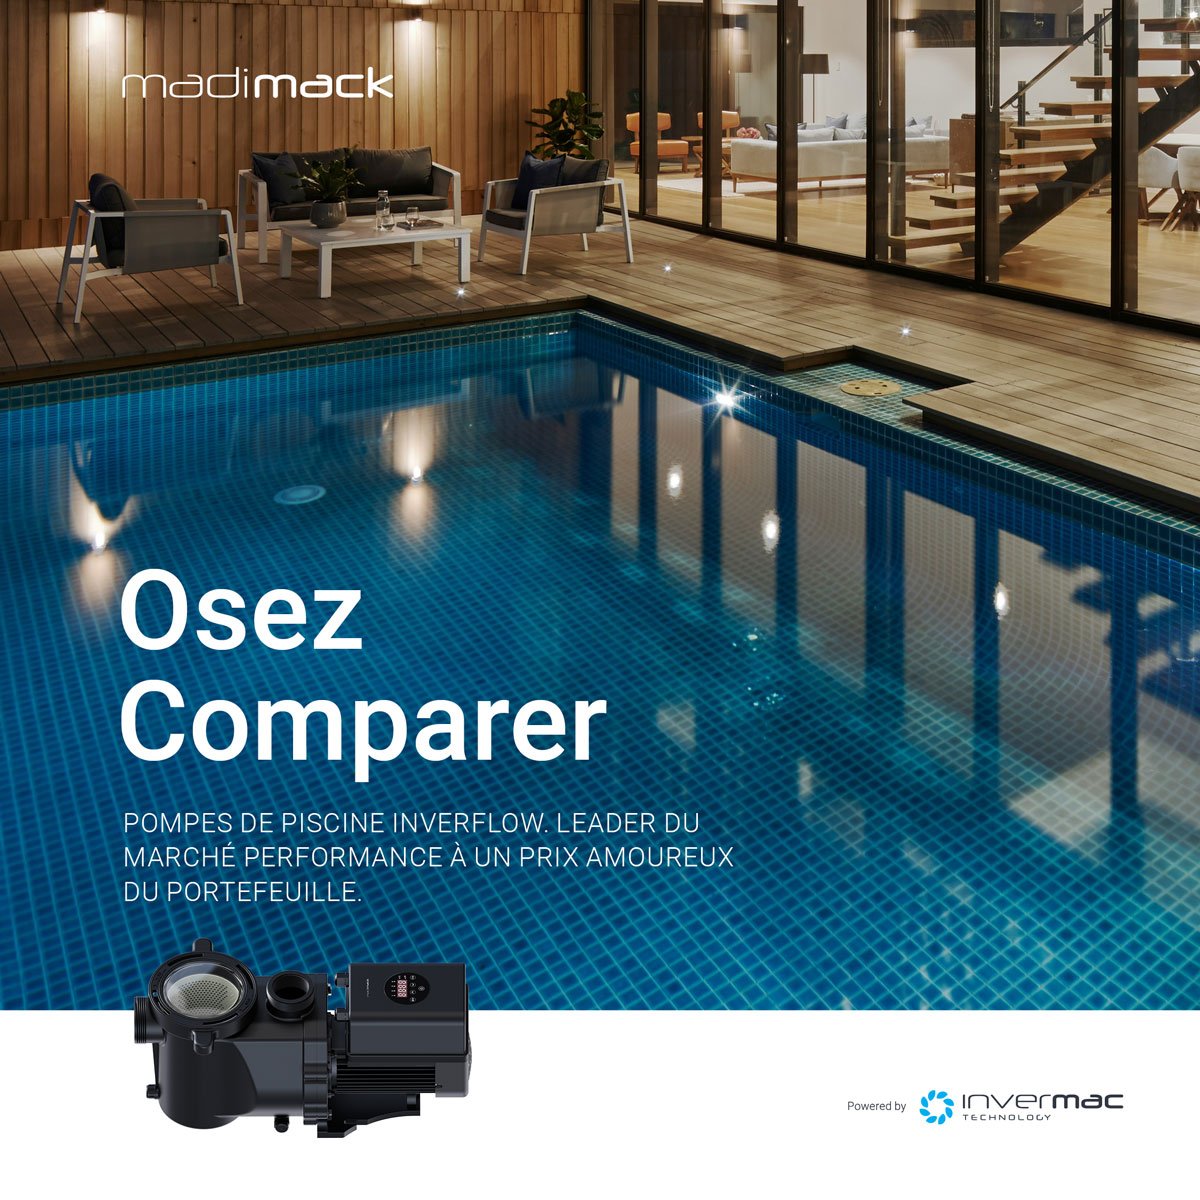 Madimack-Socmed-Collaterals_HEATING-and-Pool-Pump2_Fr